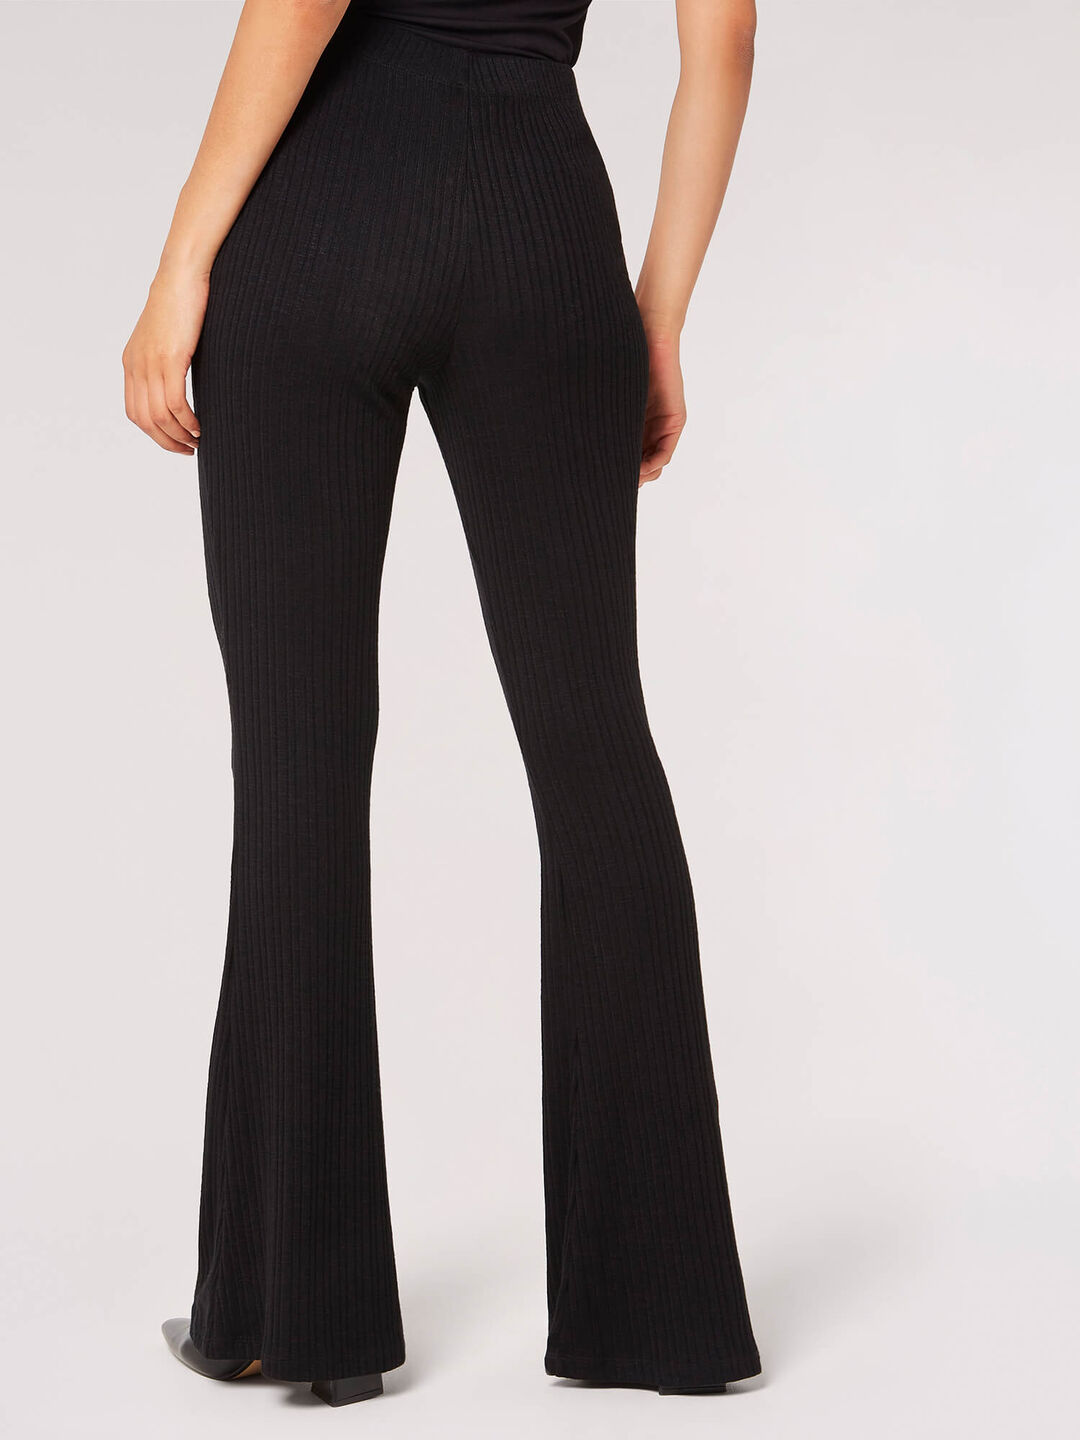 Black Shiny Ribbed Flare Trousers, Black, Compare